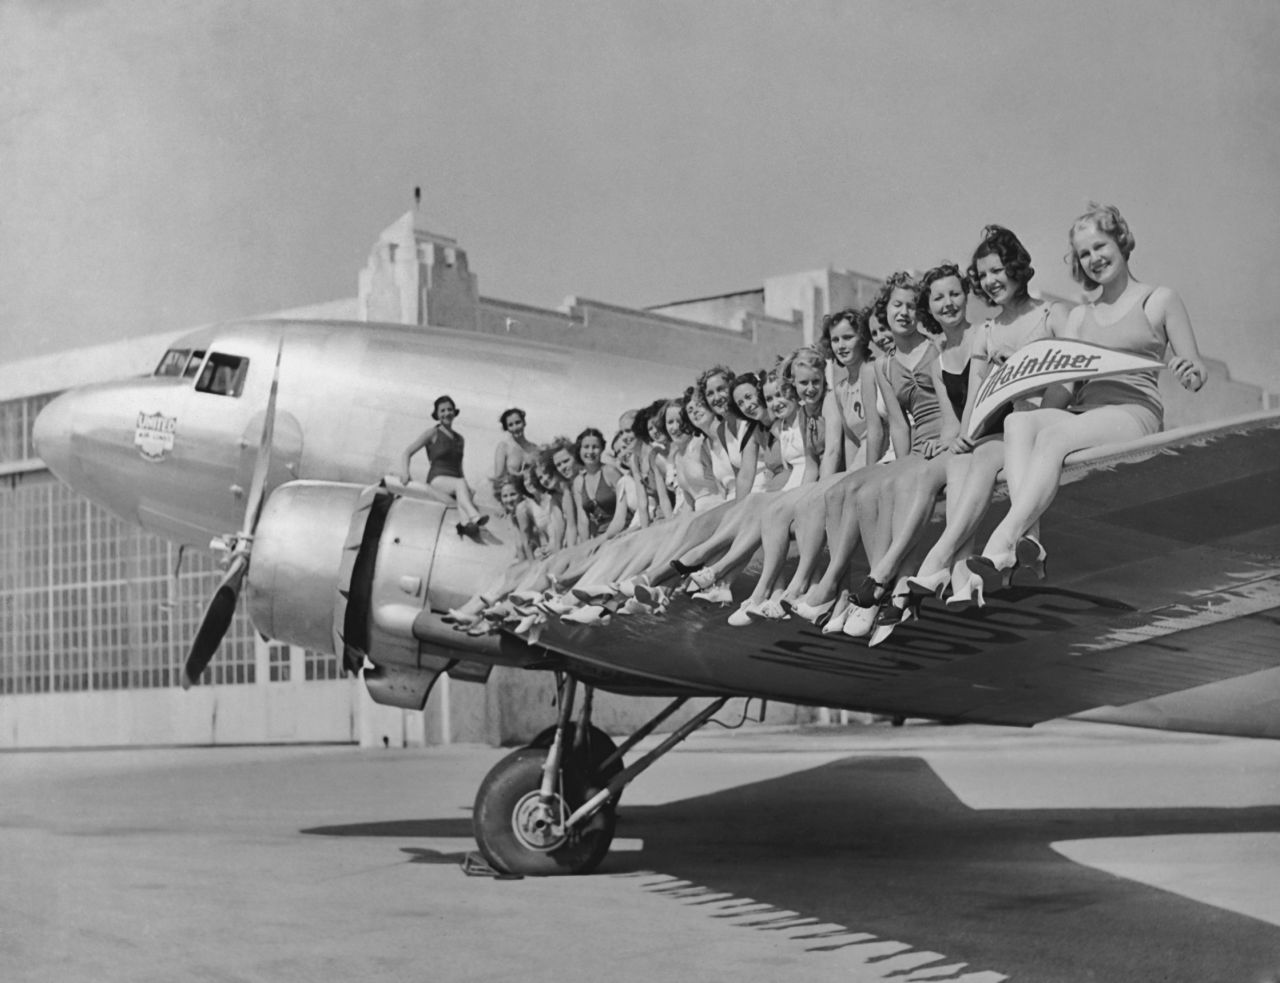 Douglas DC-3: An aircraft that has lasted through the decades.